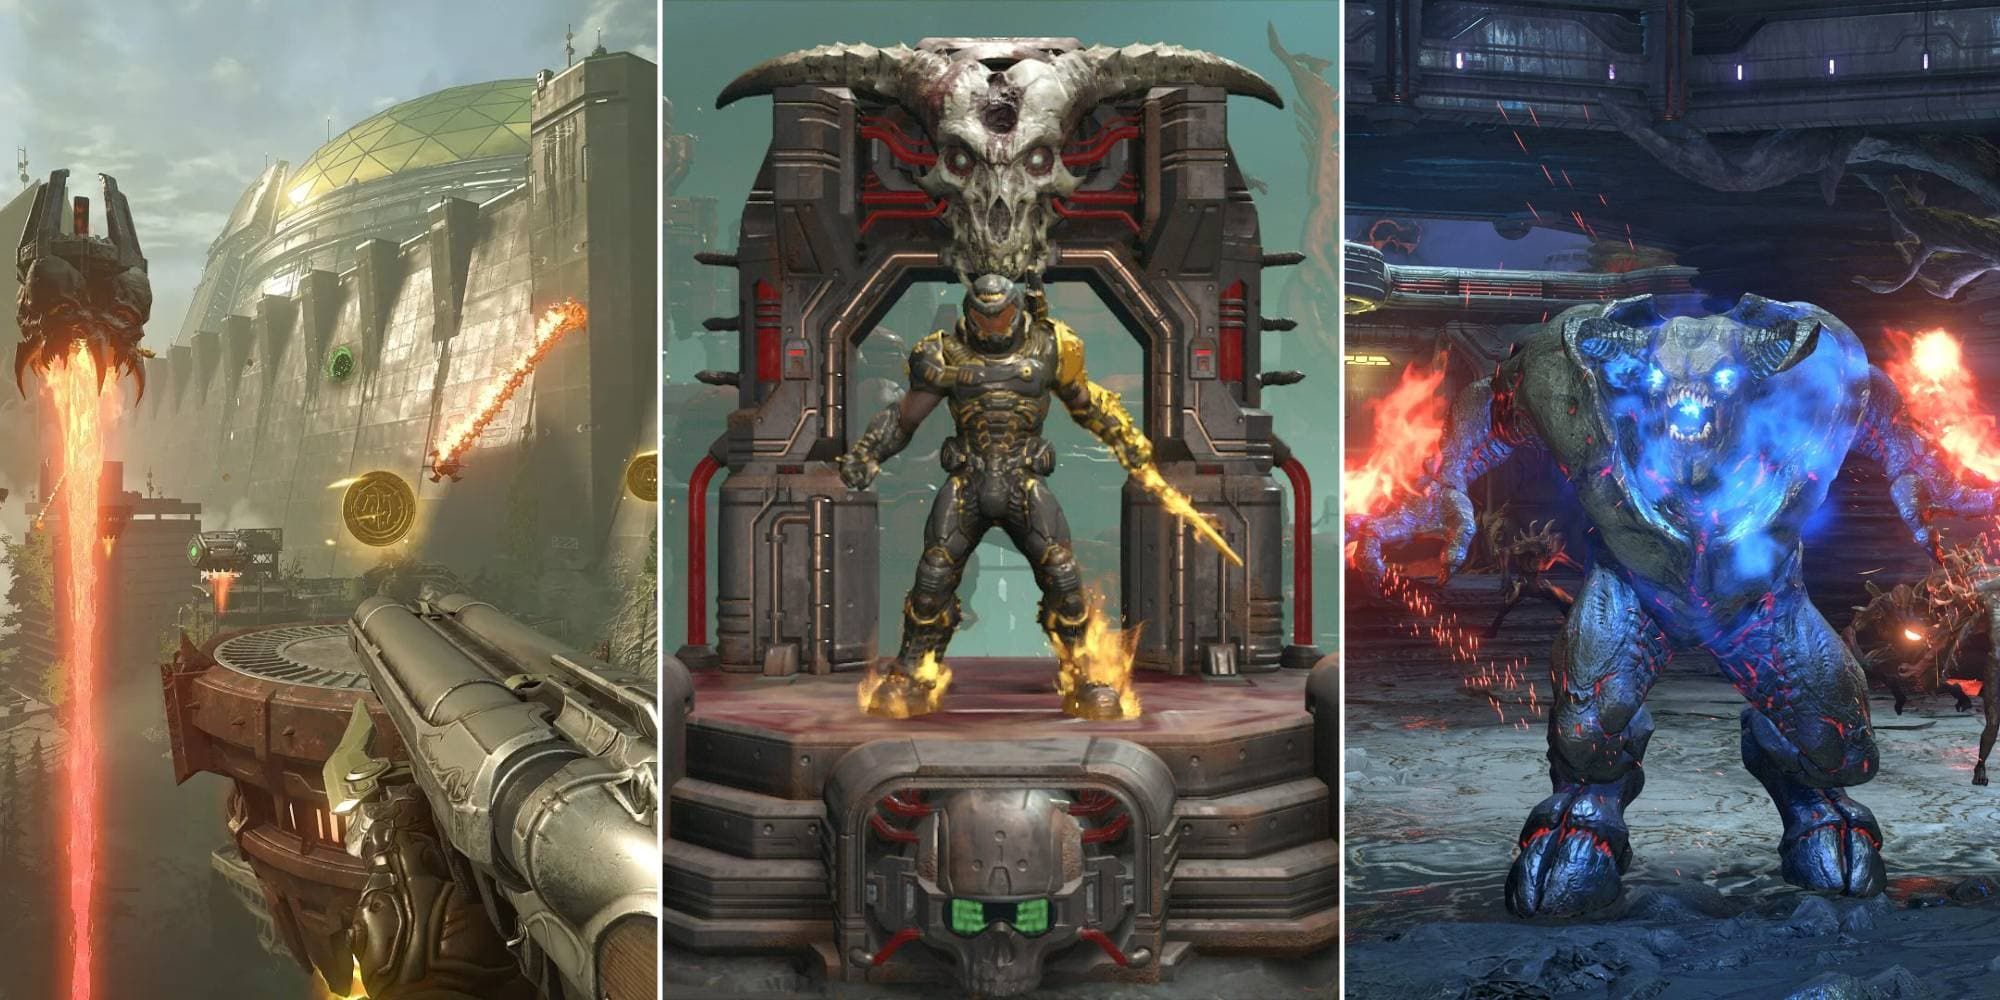 Doom Guy aims a shotgun, Doom Guy is centered on a demonic altar, and a horde of demons attack.